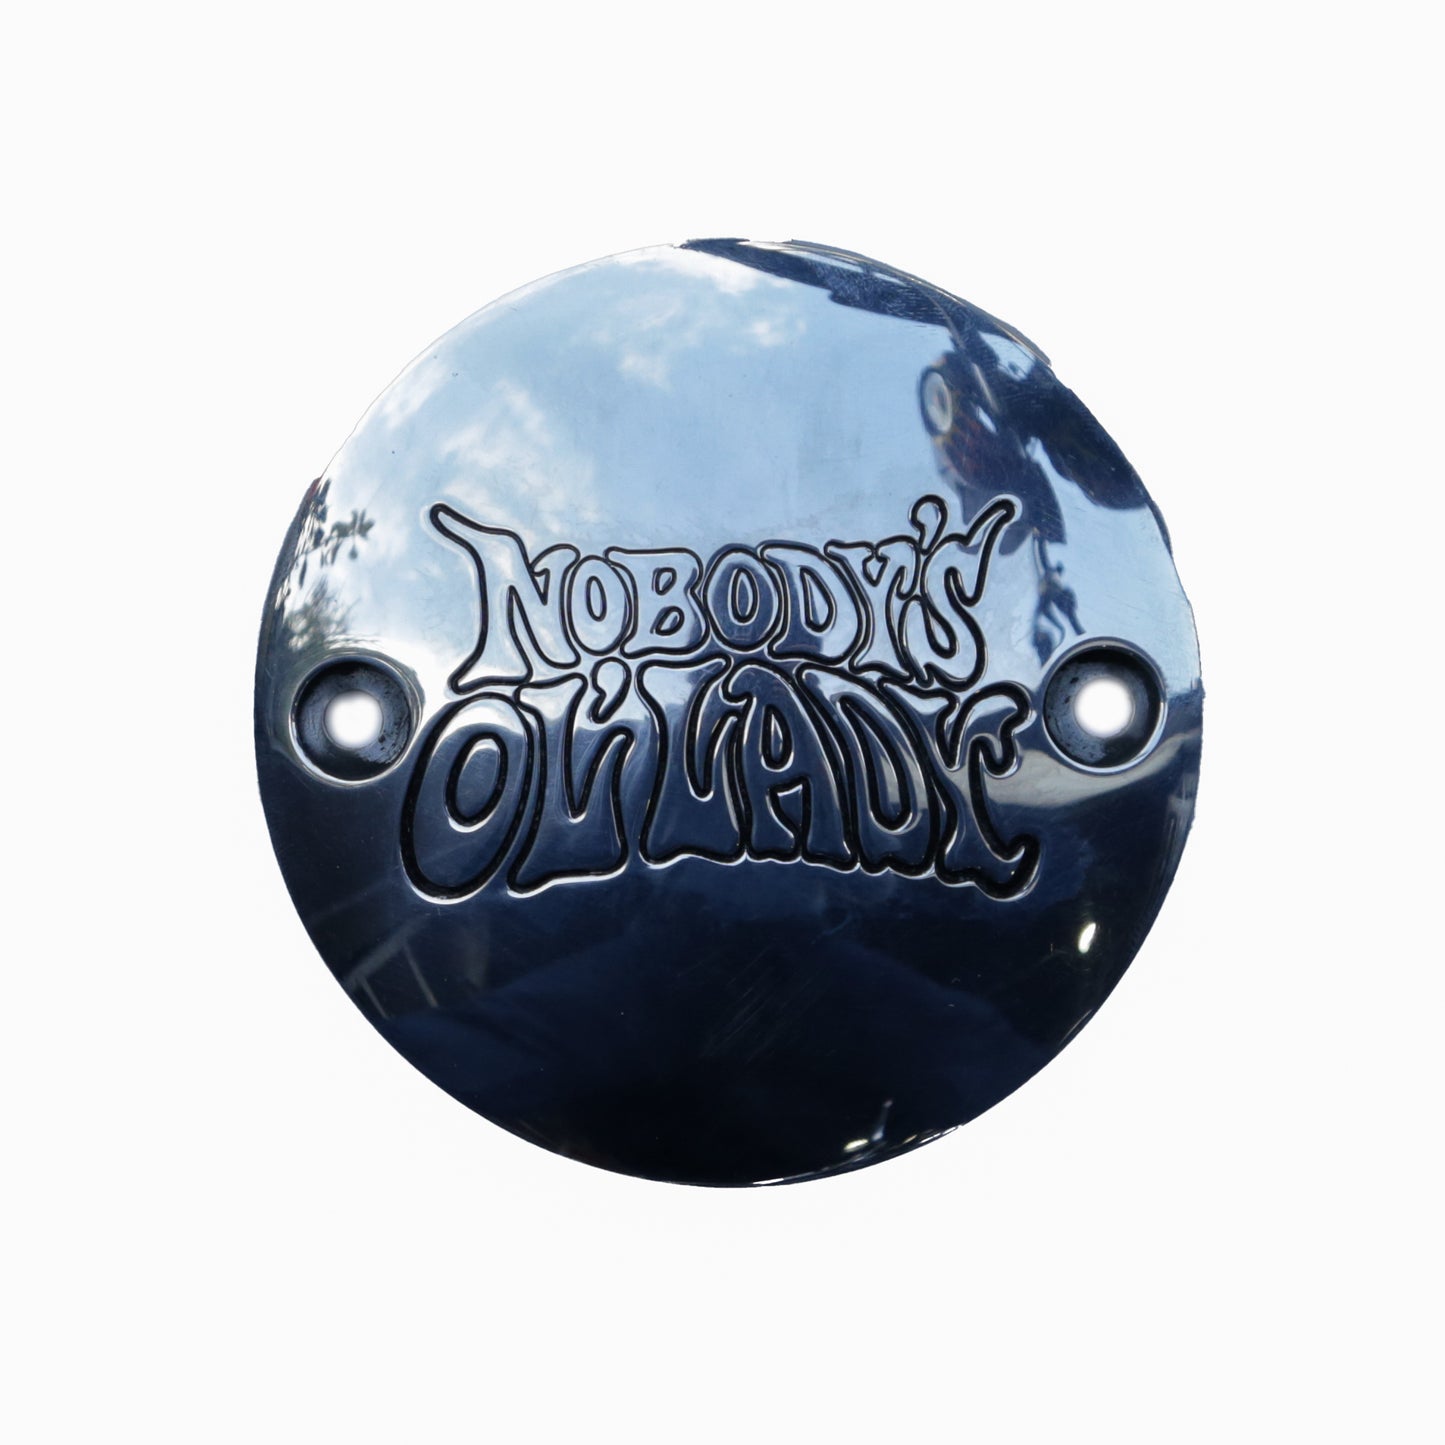 Axel Co  "Nobody's Ol' Lady"  Motorcycle Points Cover